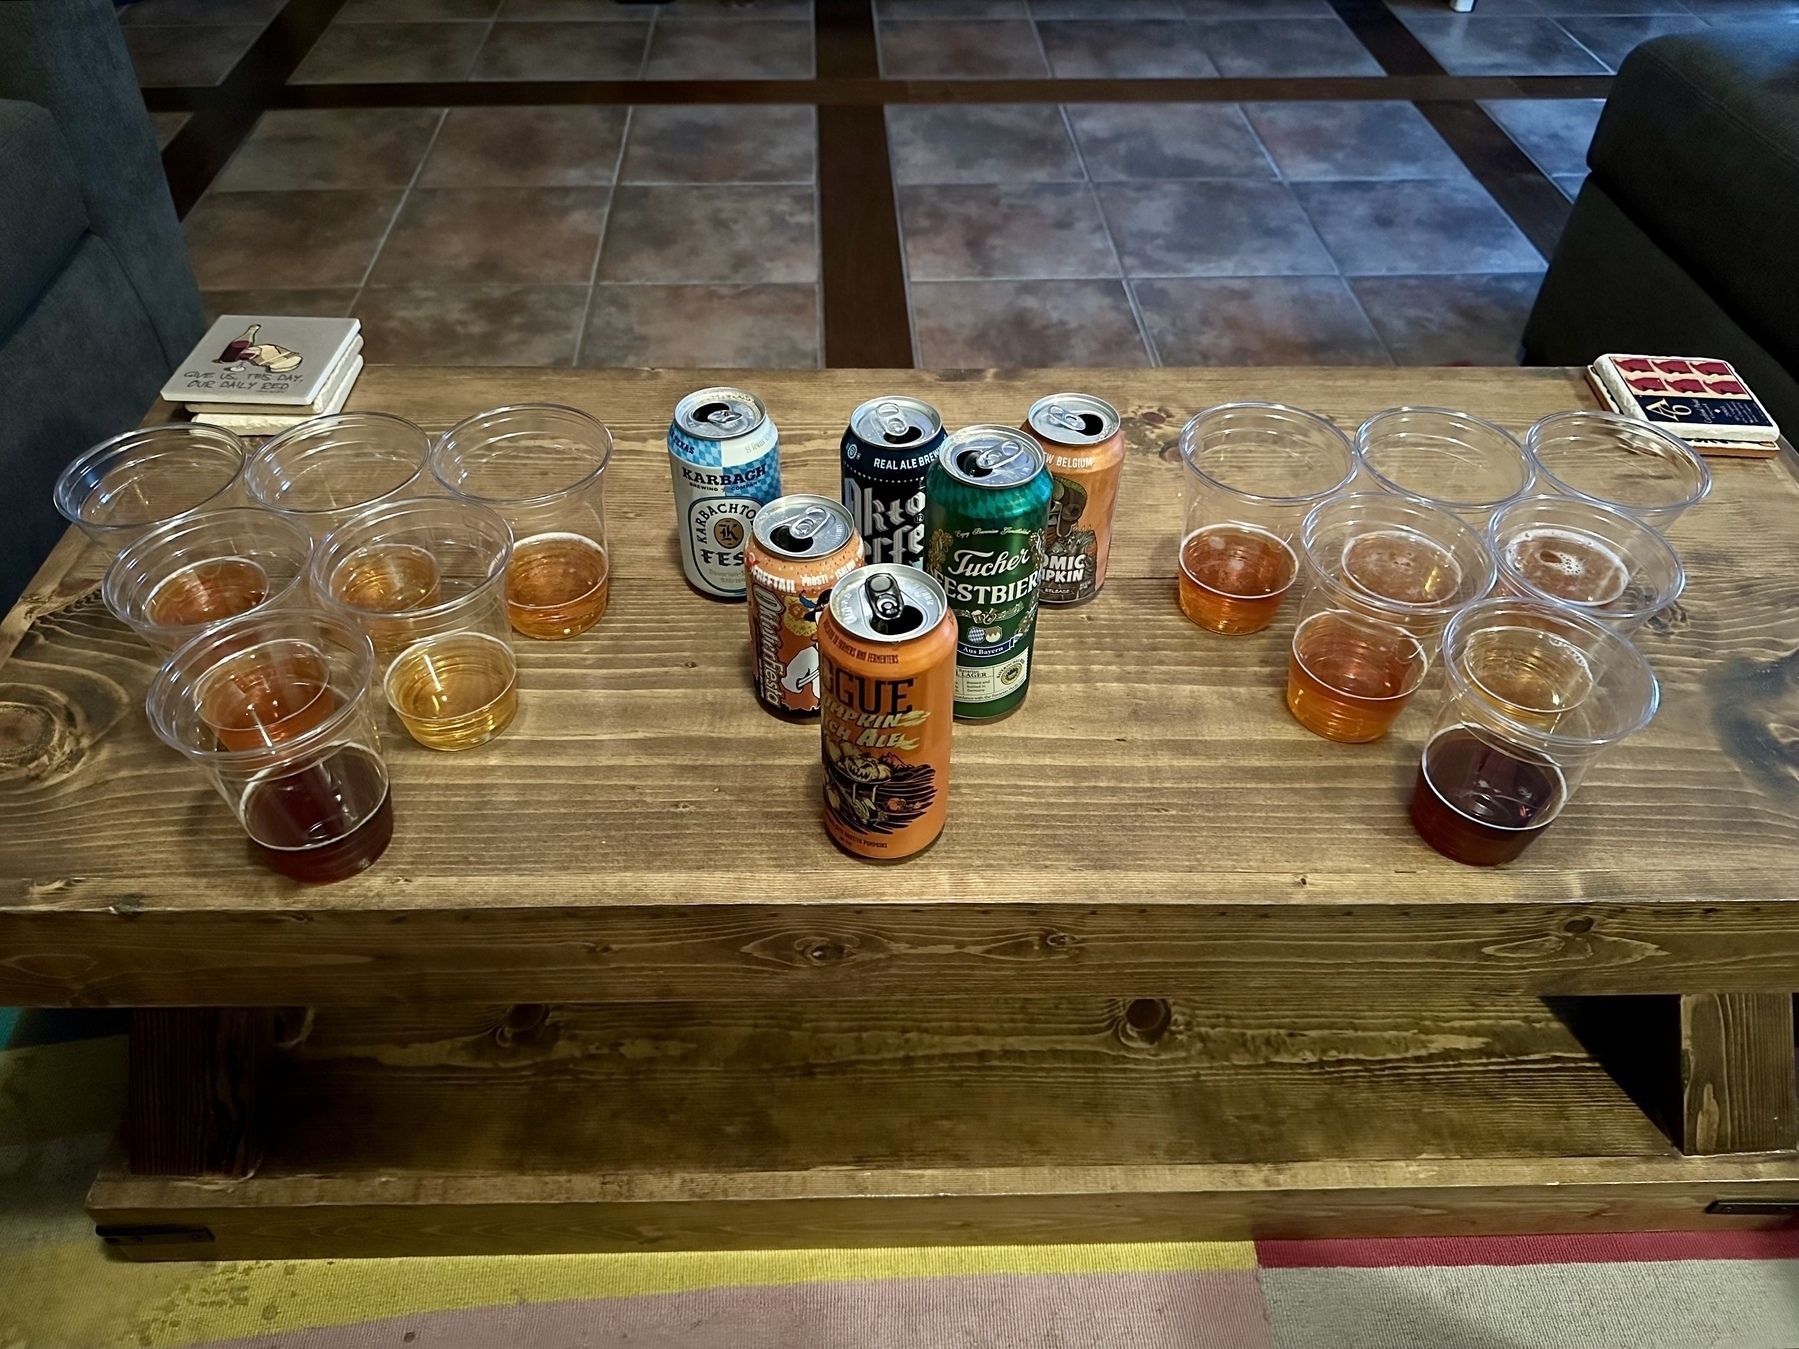 Six cans of beer poured into twelve plastic tasting cups, all arranged in three triangles on a wooden coffee table:&10;&10;* Rogue Pumpkin Patch Ale&10;* Freetail Oktoberfiesta&10;* Tucher Festbier&10;* Karbach Karbachtoberfest&10;* Real Ale Oktoberfest&10;* Voodoo Ranger Atomic Pumpkin&10;&10;&10;